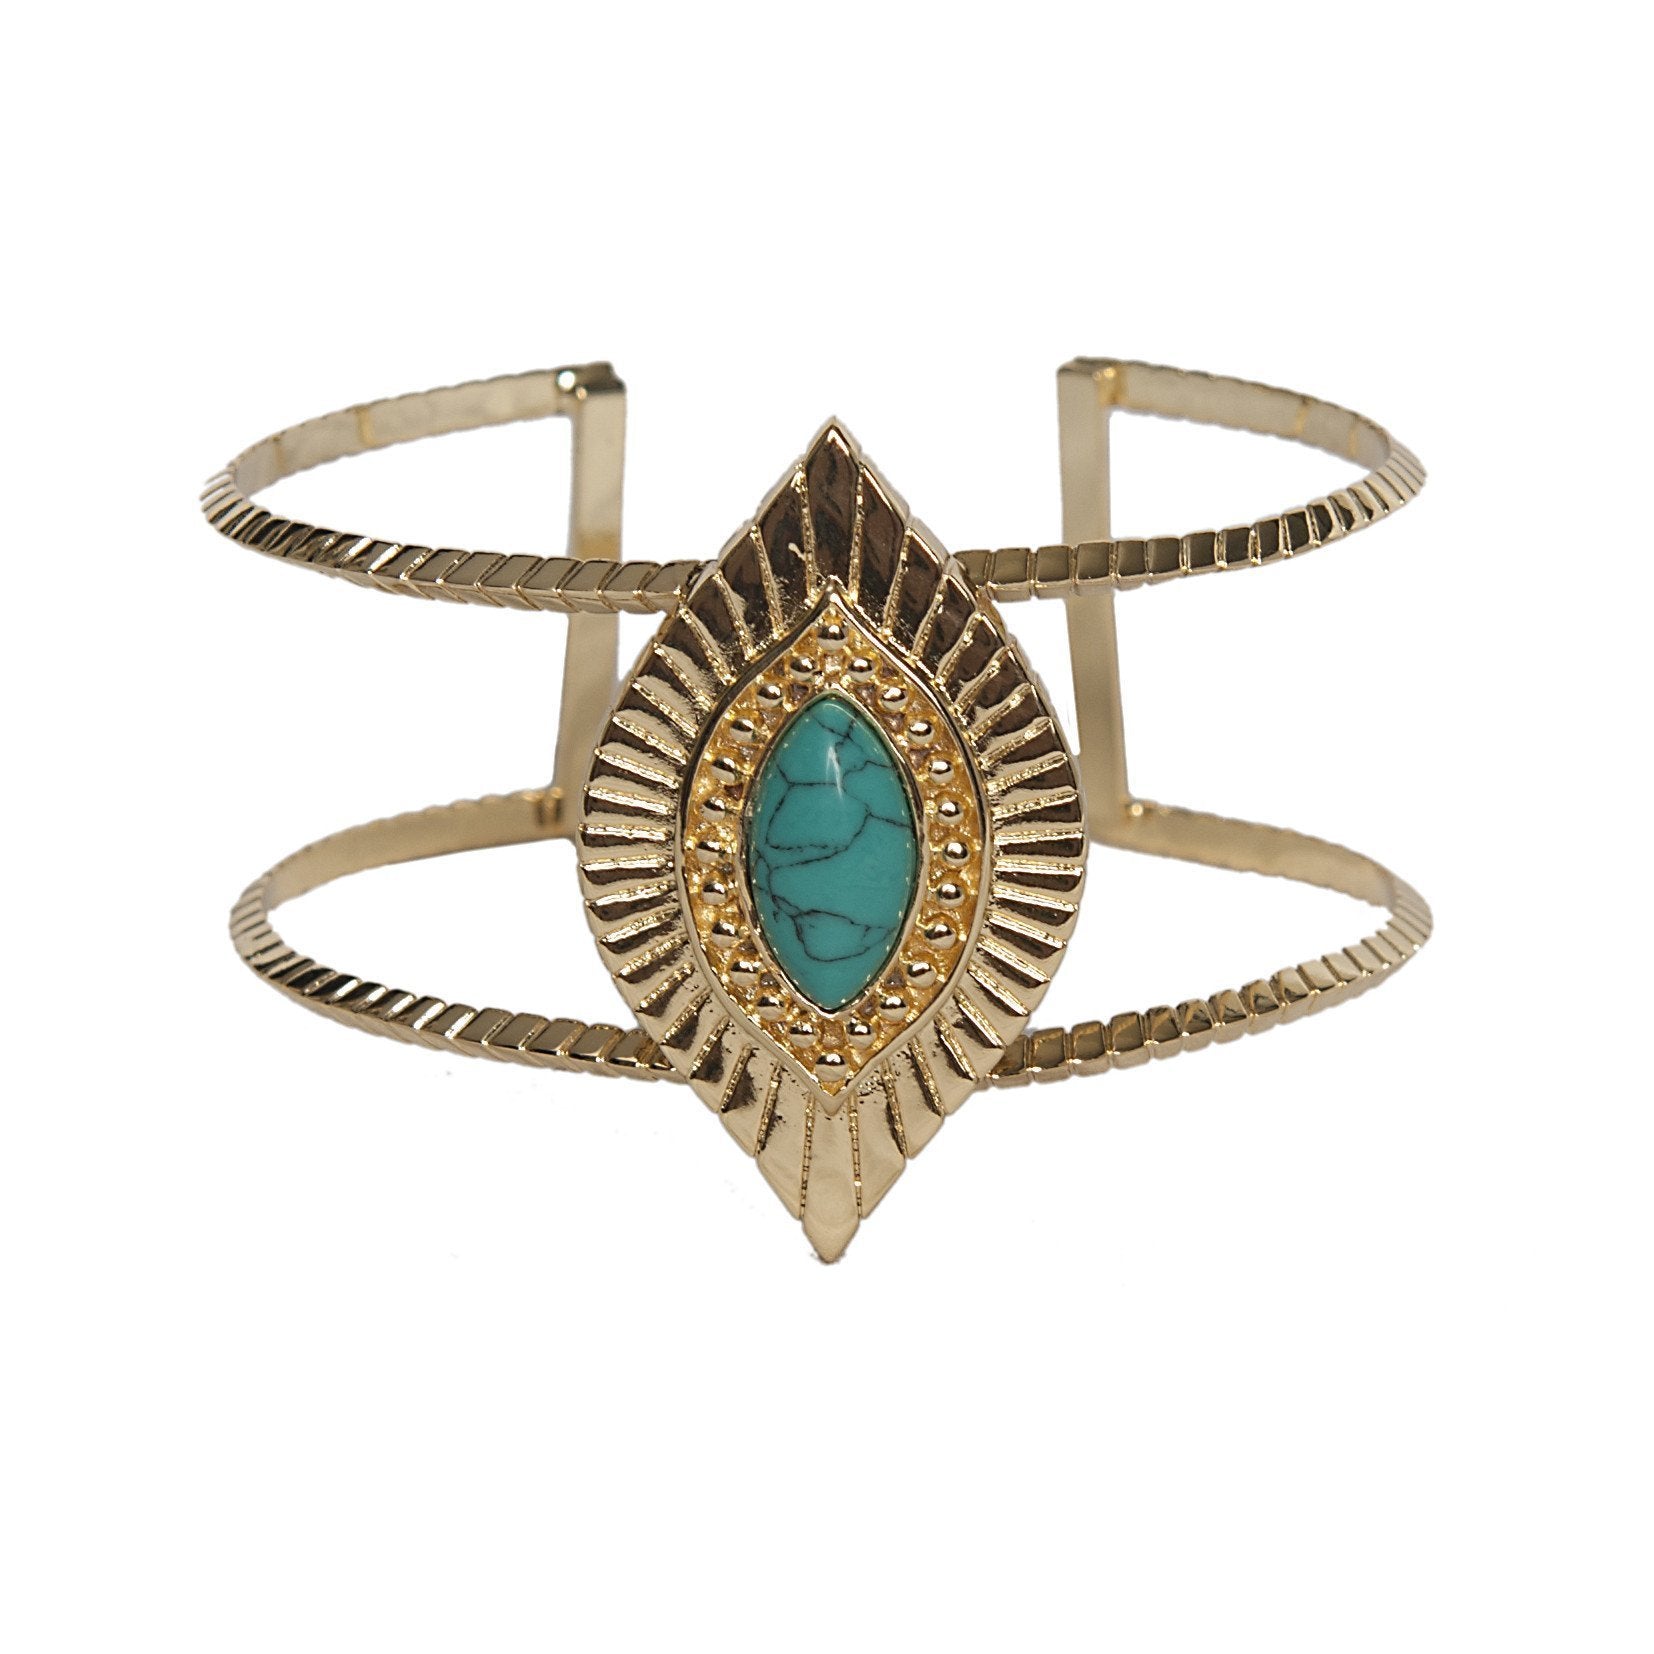 Women outfit in a bracelet rental from Ettika called Sedona Selfie Cuff Turquoise And Gold